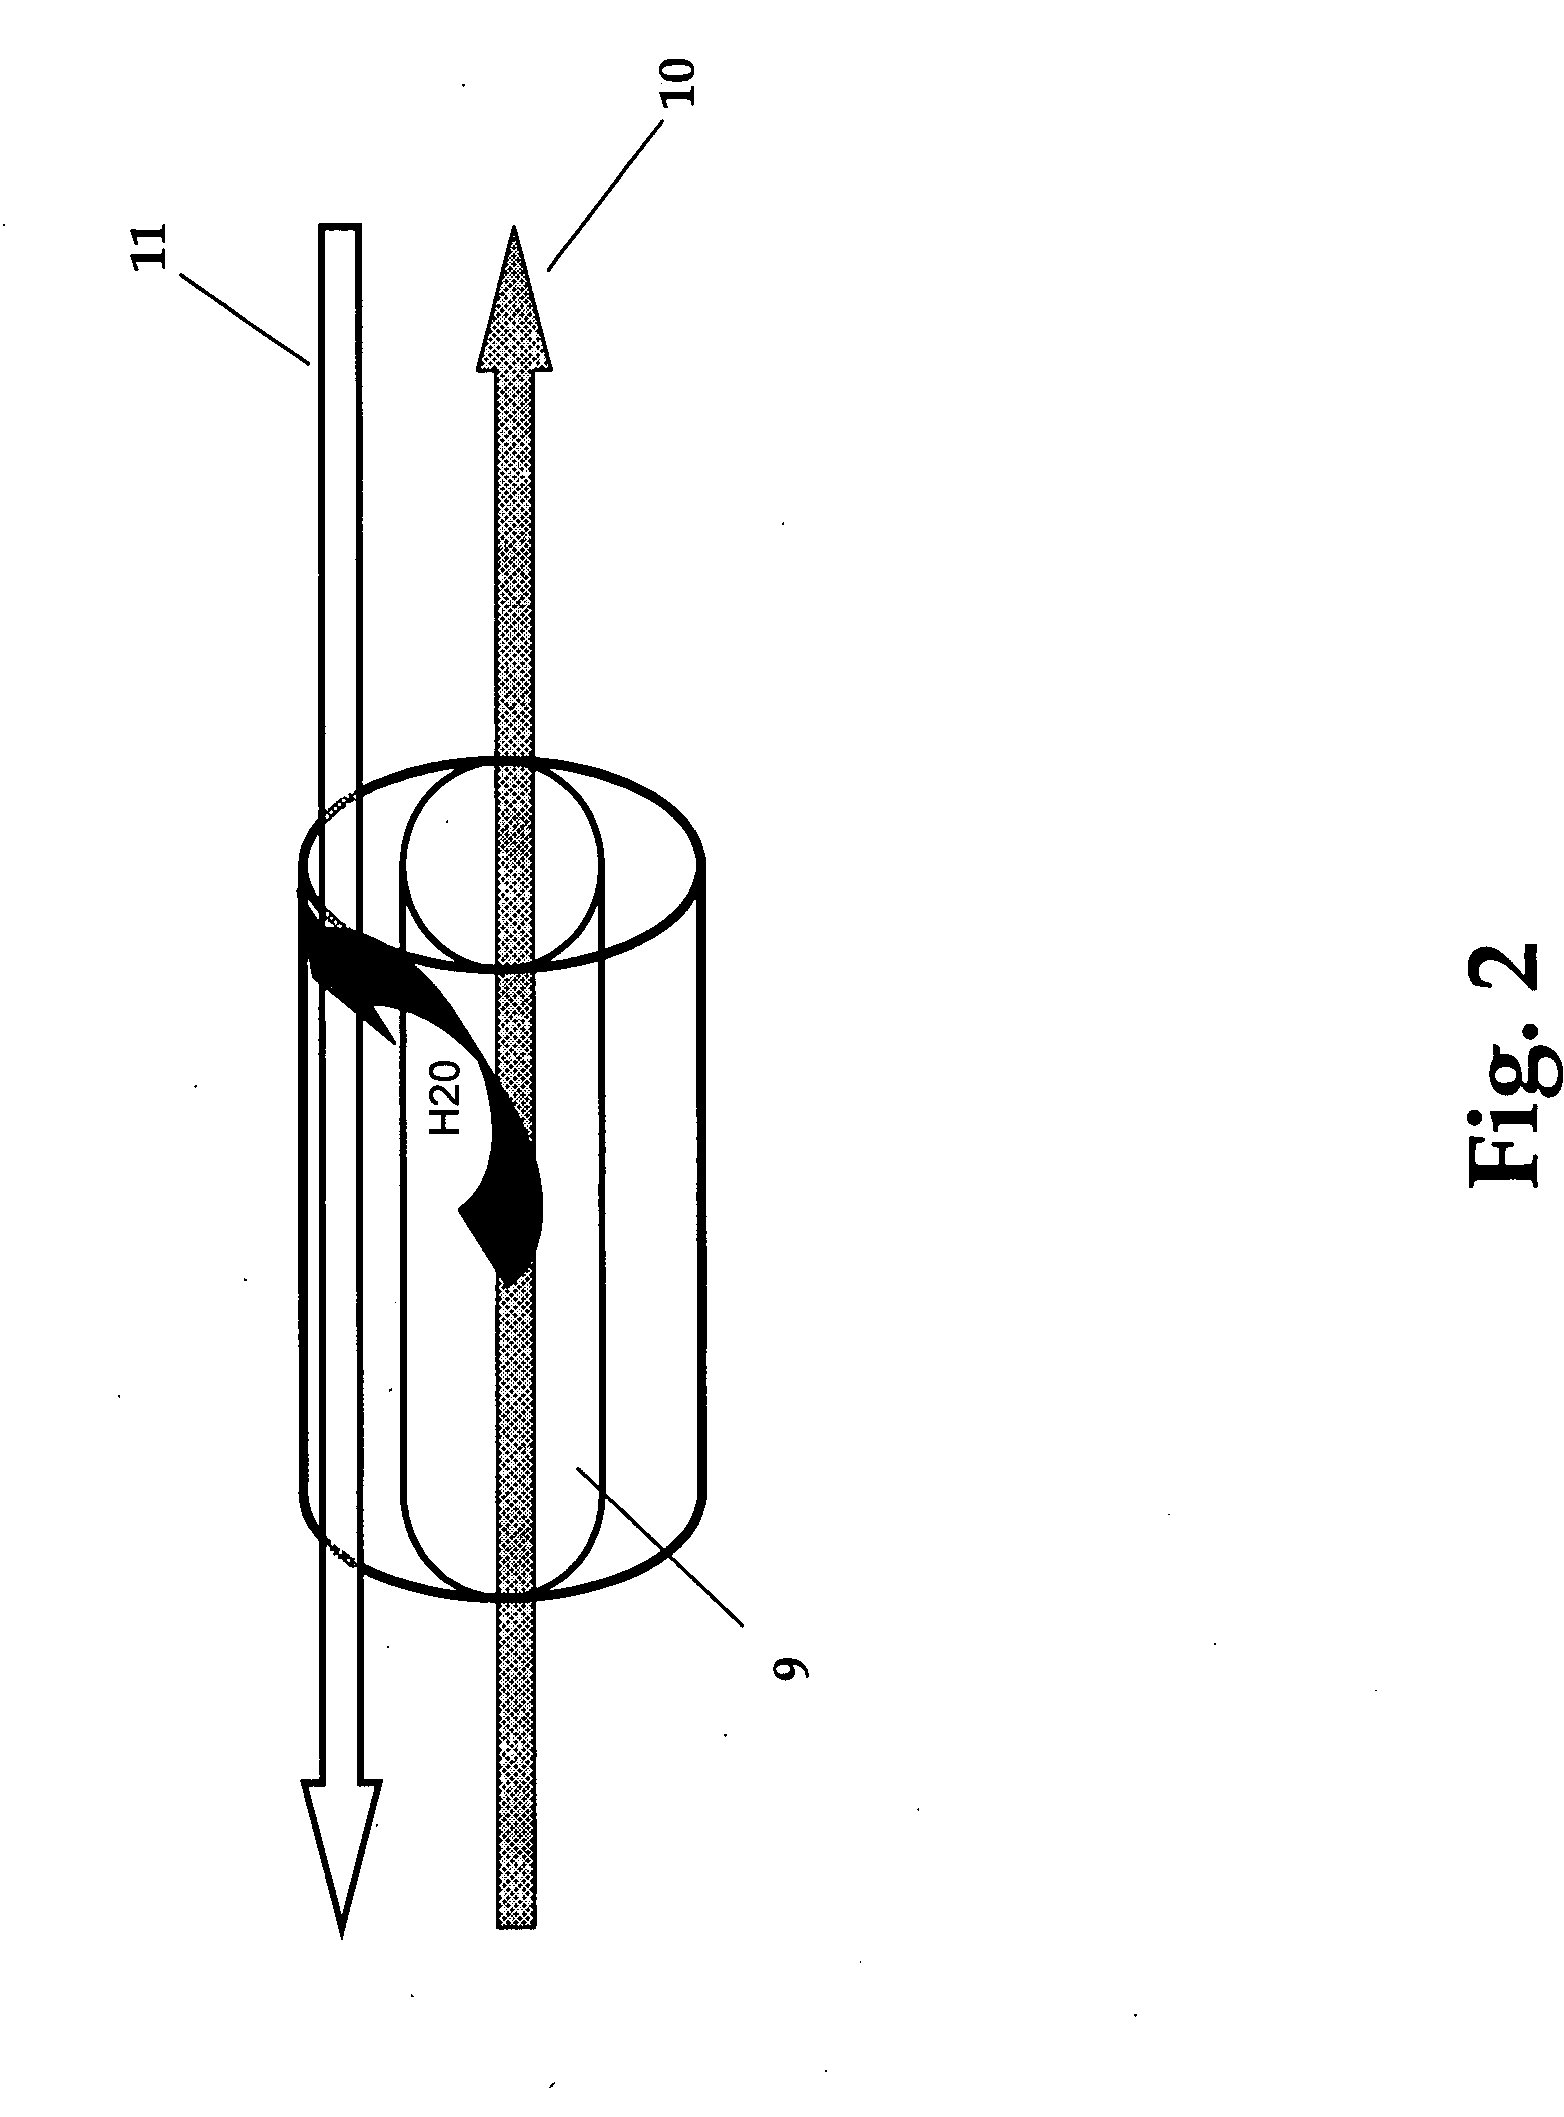 Gas concentrator with improved water rejection capability